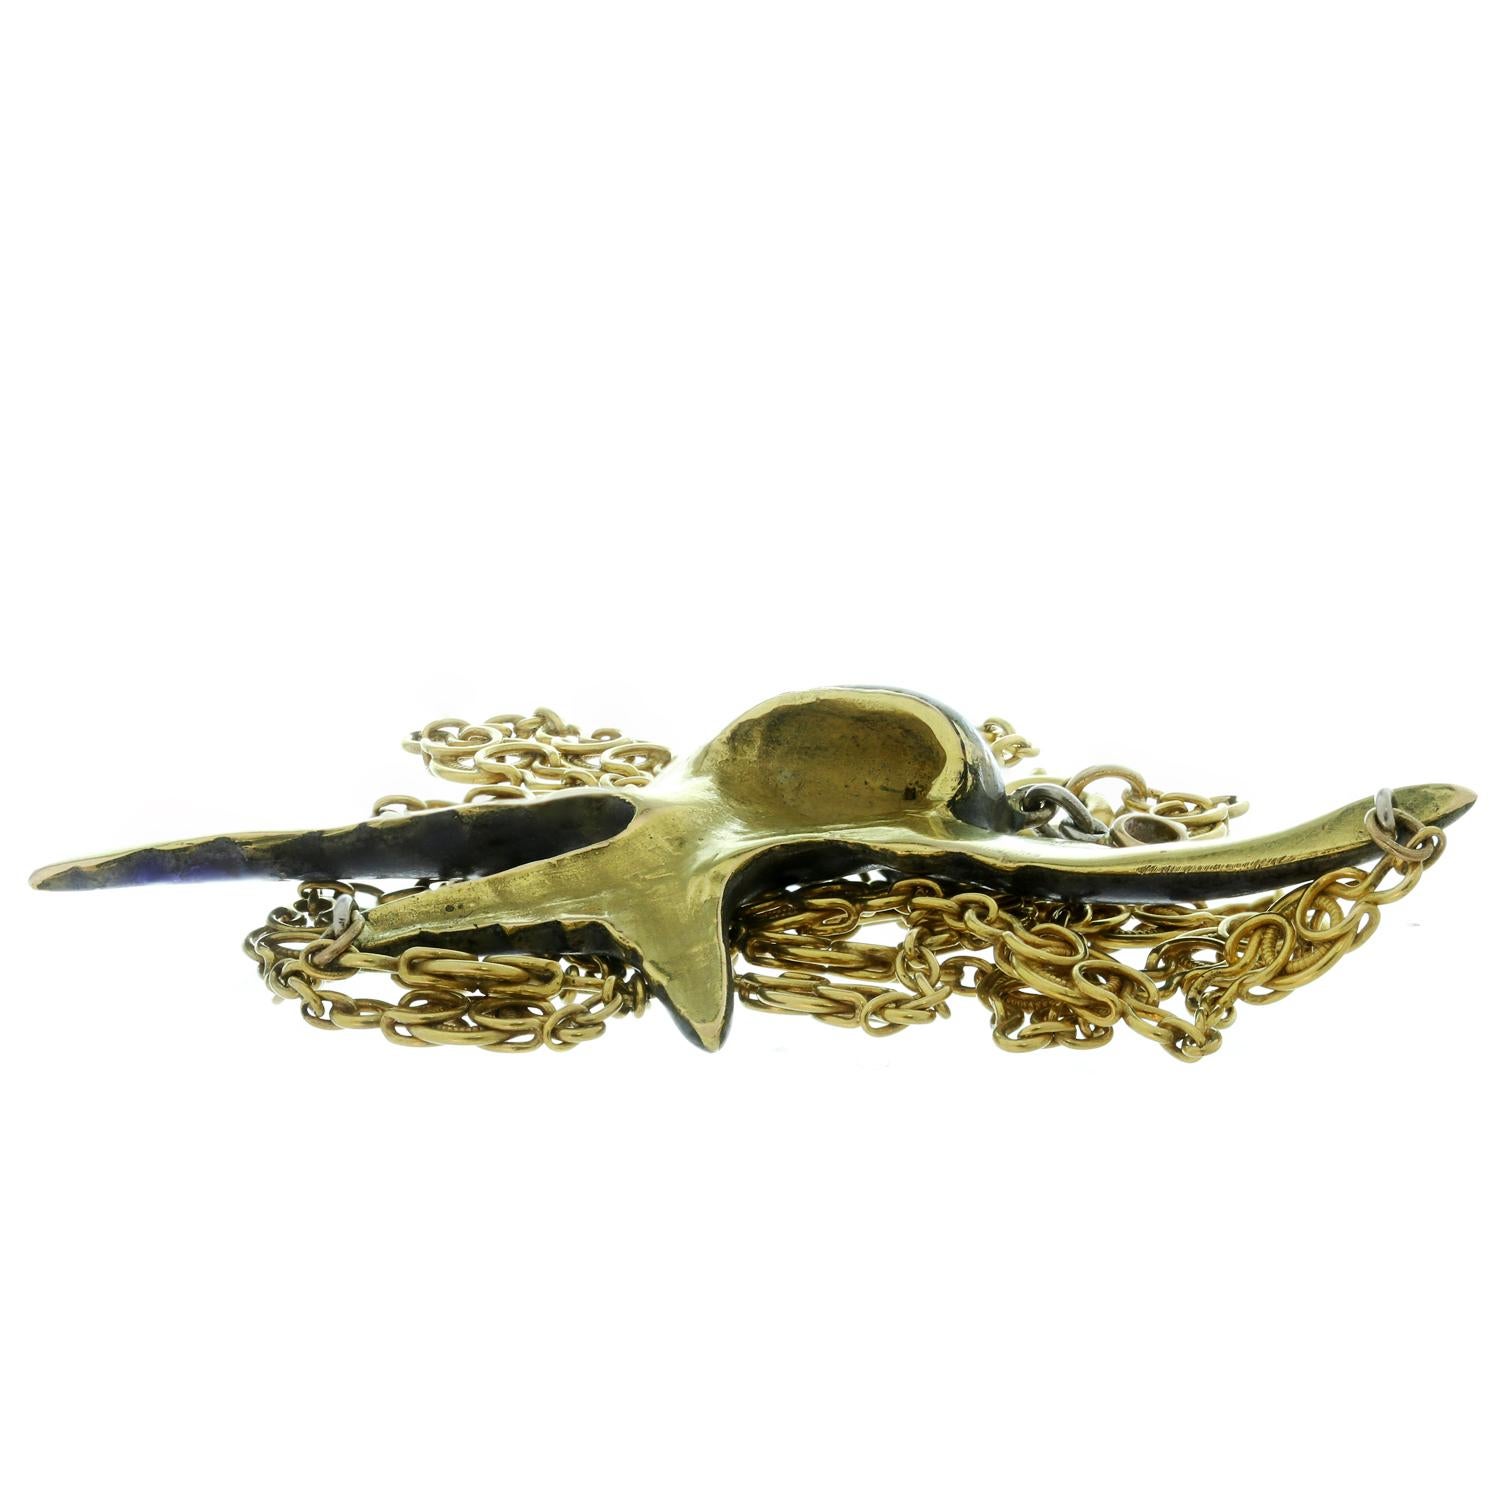 This rare and collectible antique Art Nouveau necklace features a pendant of swallow bird with outstretched wings in flight crafted in platinum and 15k yellow gold and plique-à-jour enamel and accented with red ruby eyes and completed with a